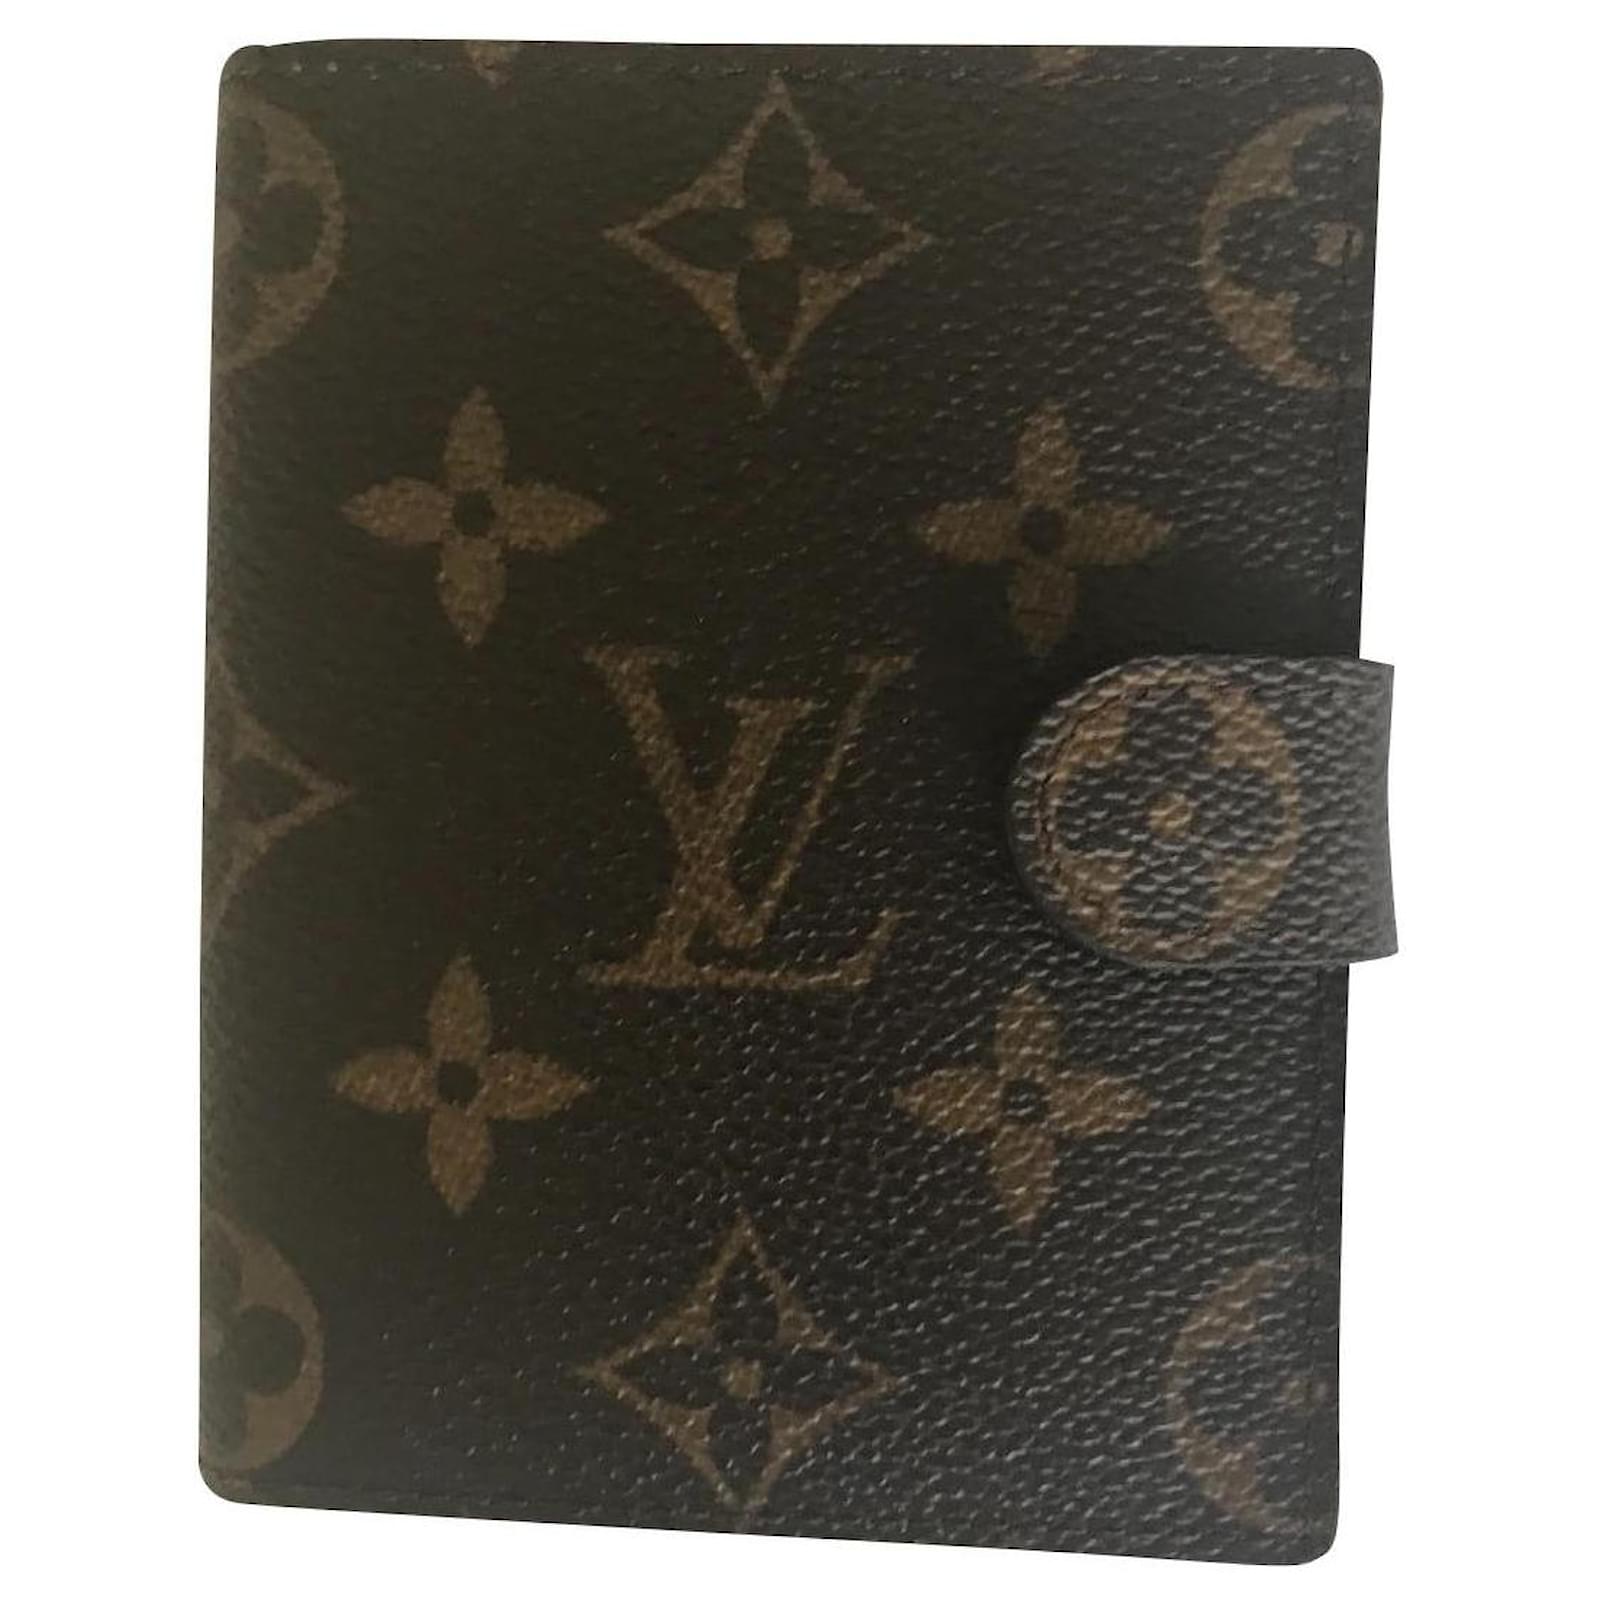 Small leather goods LOUIS VUITTON Women's